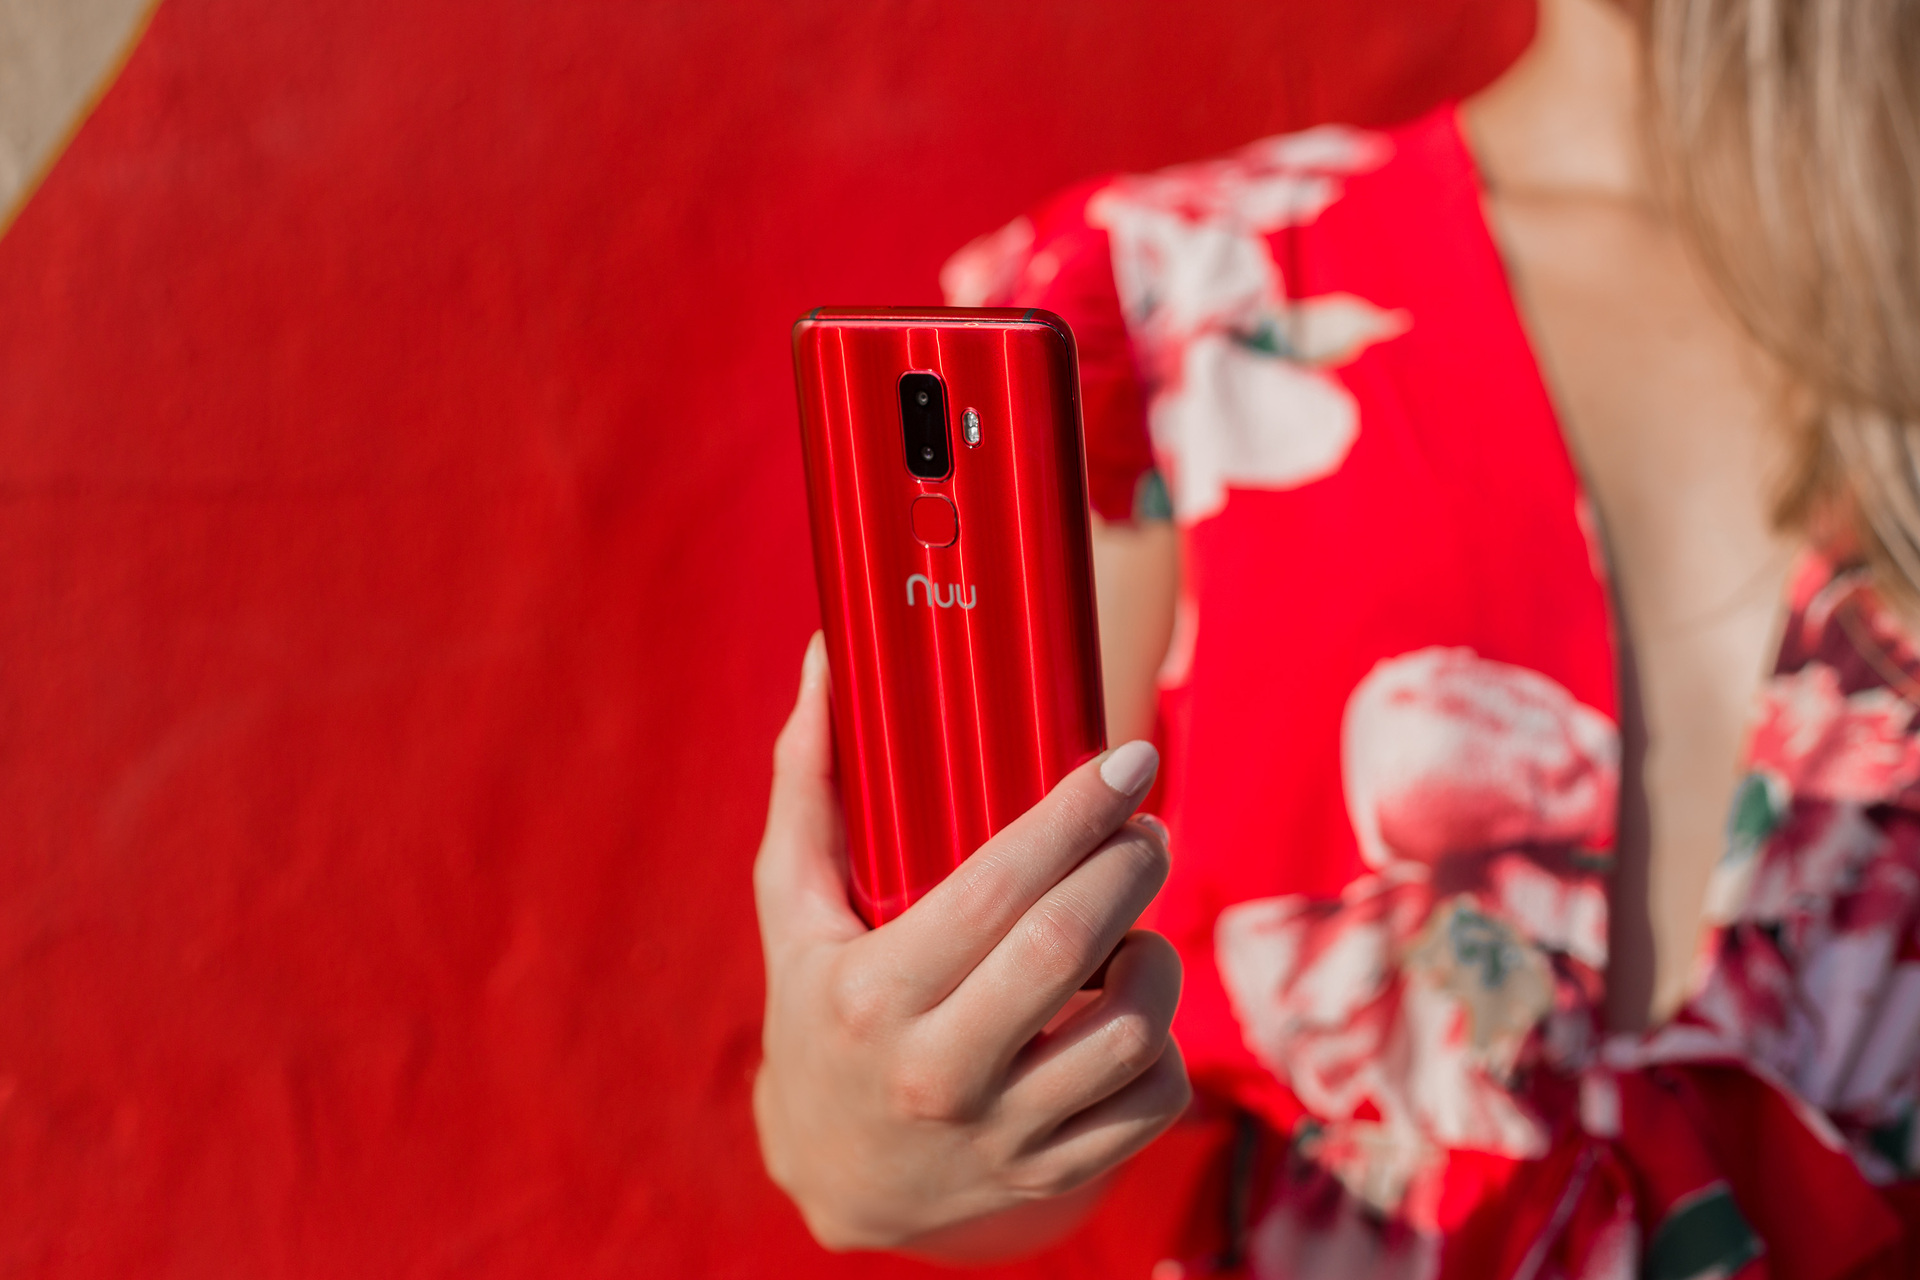 NUU G3 in red